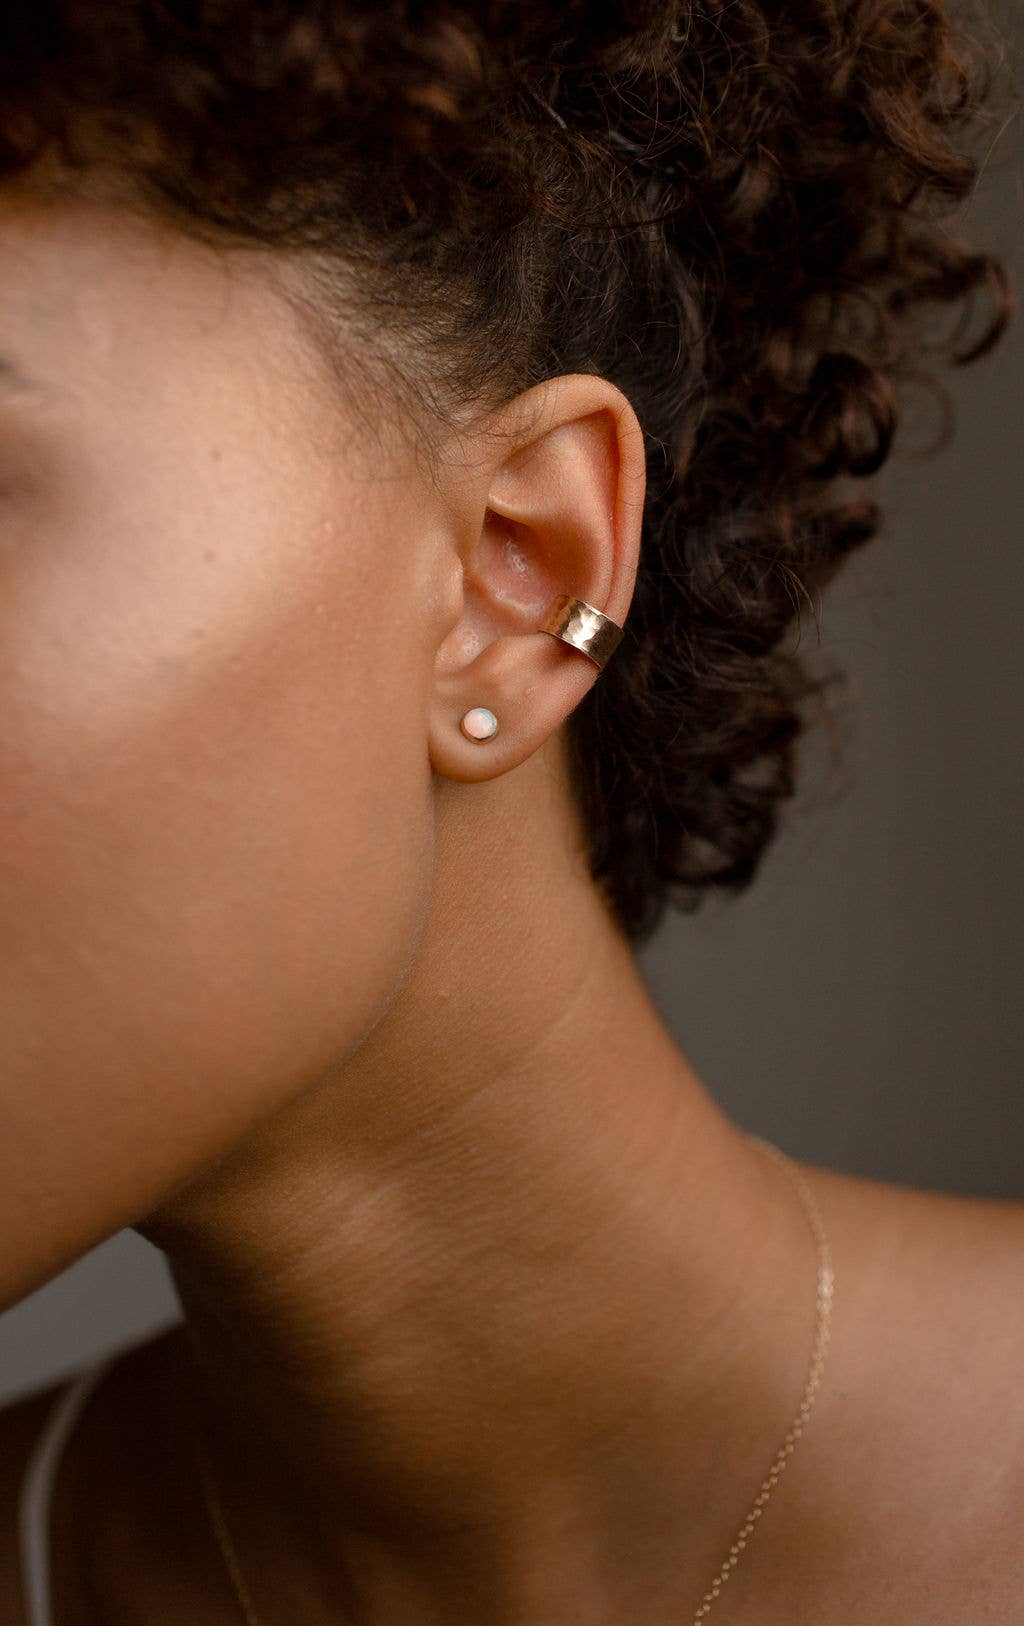 Load image into Gallery viewer, Hammered Ear Cuff: 14k Gold Fill - Echo Market
